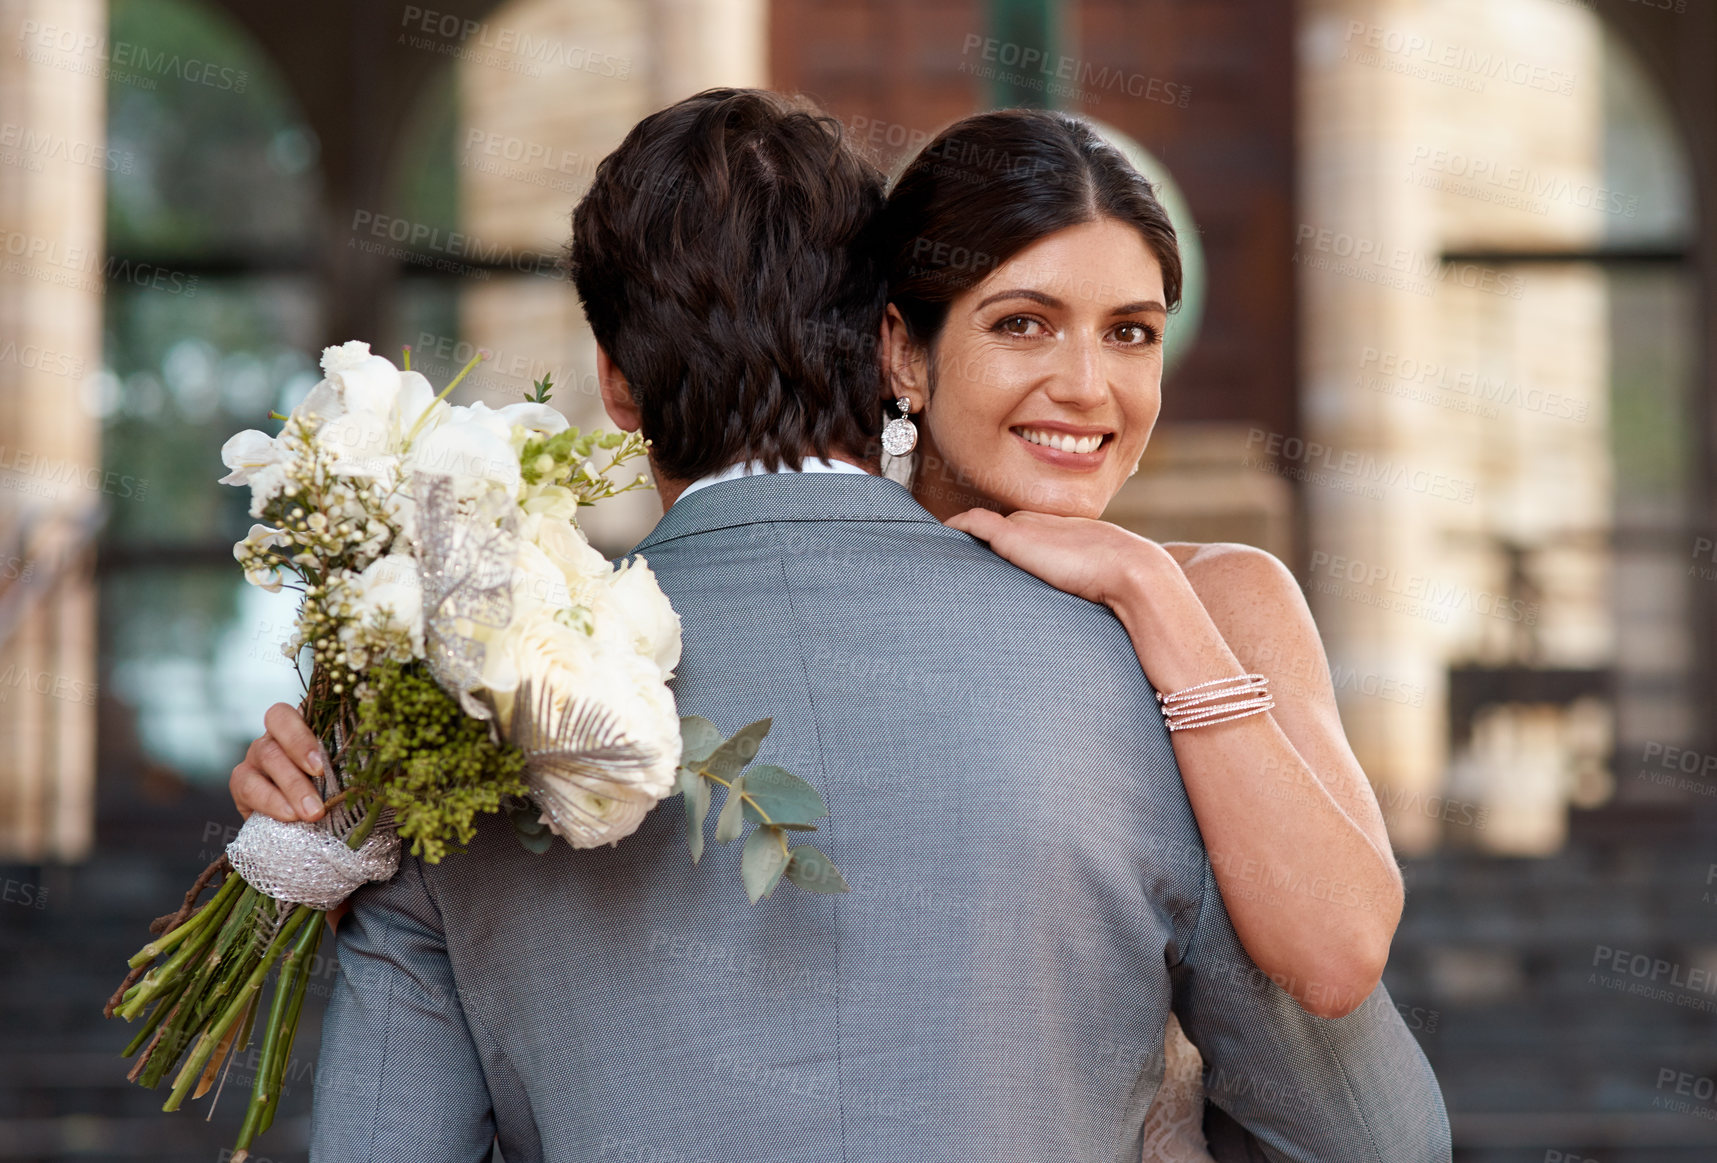 Buy stock photo Flowers, wedding and love with a married couple hugging outdoor together after a ceremony of tradition. Hug, marriage or commitment with a man and woman outside looking happy as husband and wife